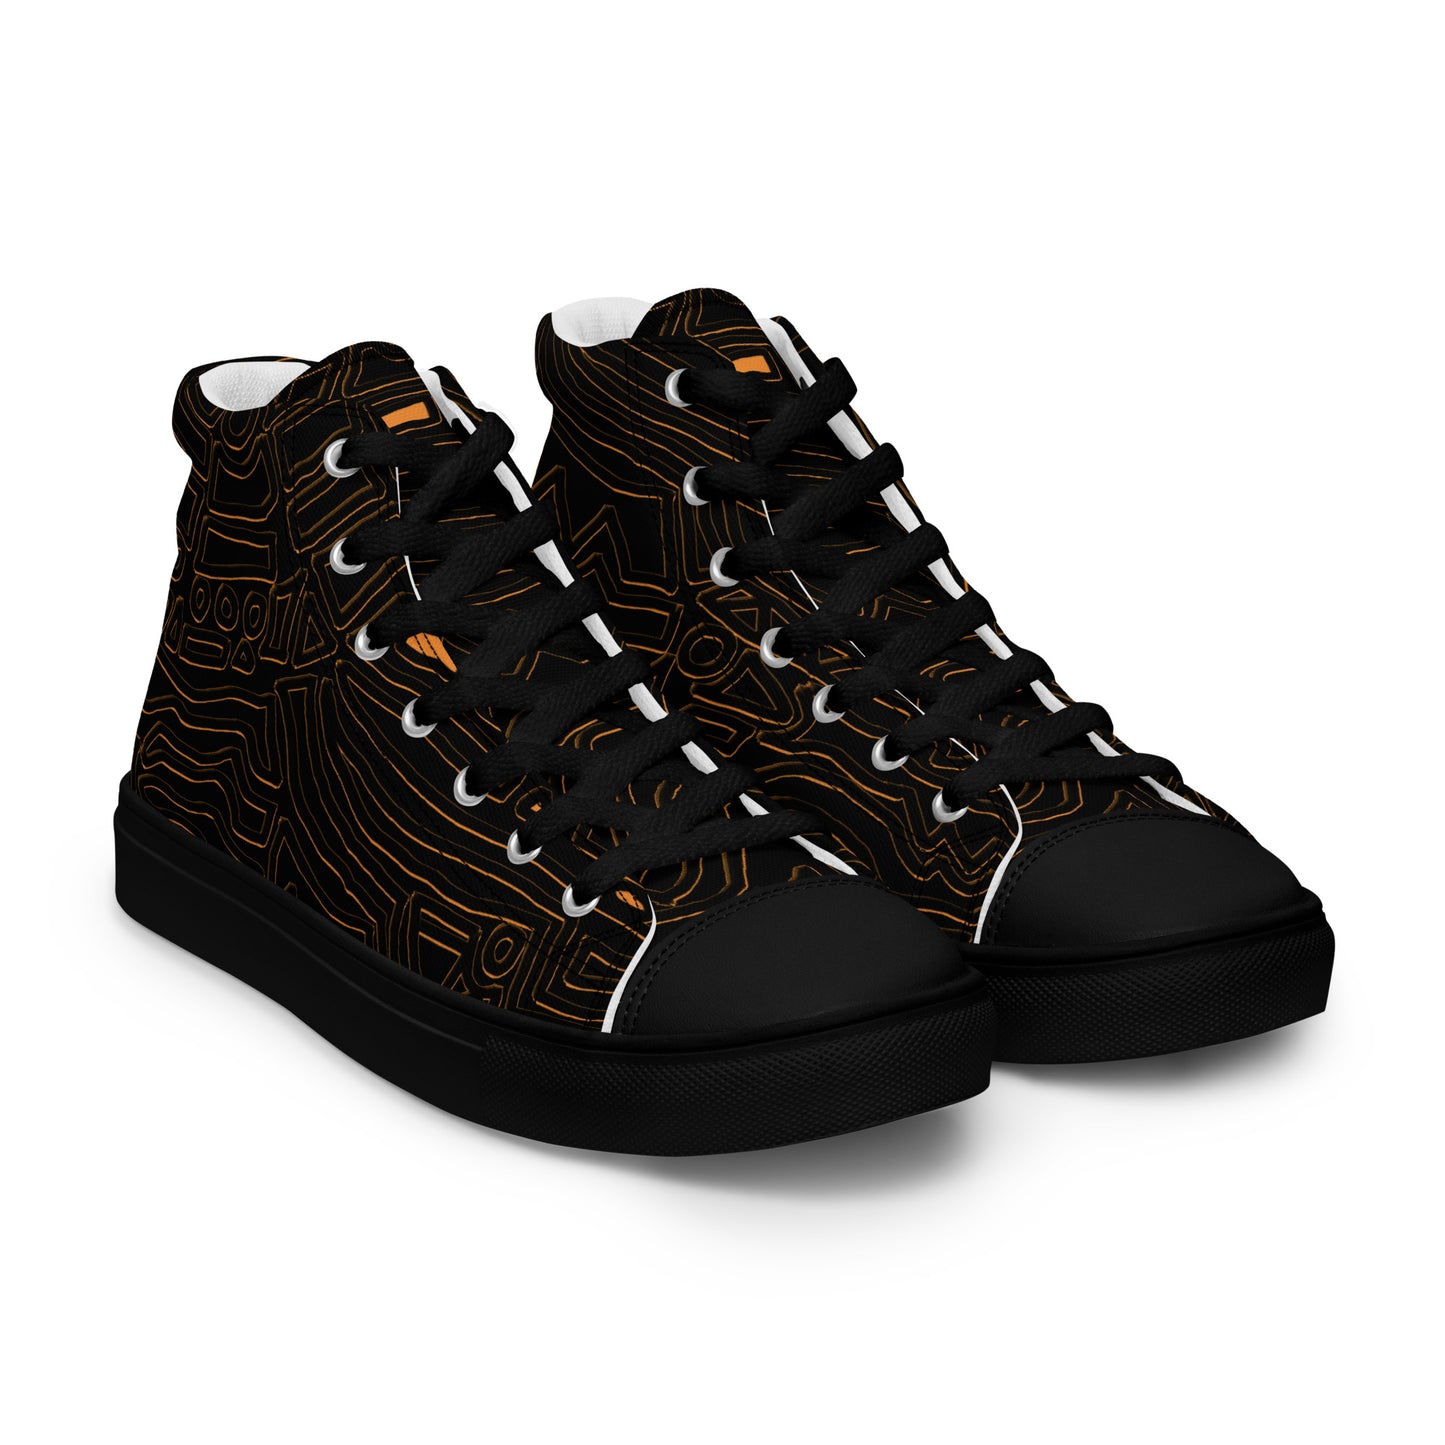 Obatala - Women's high canvas sneakers